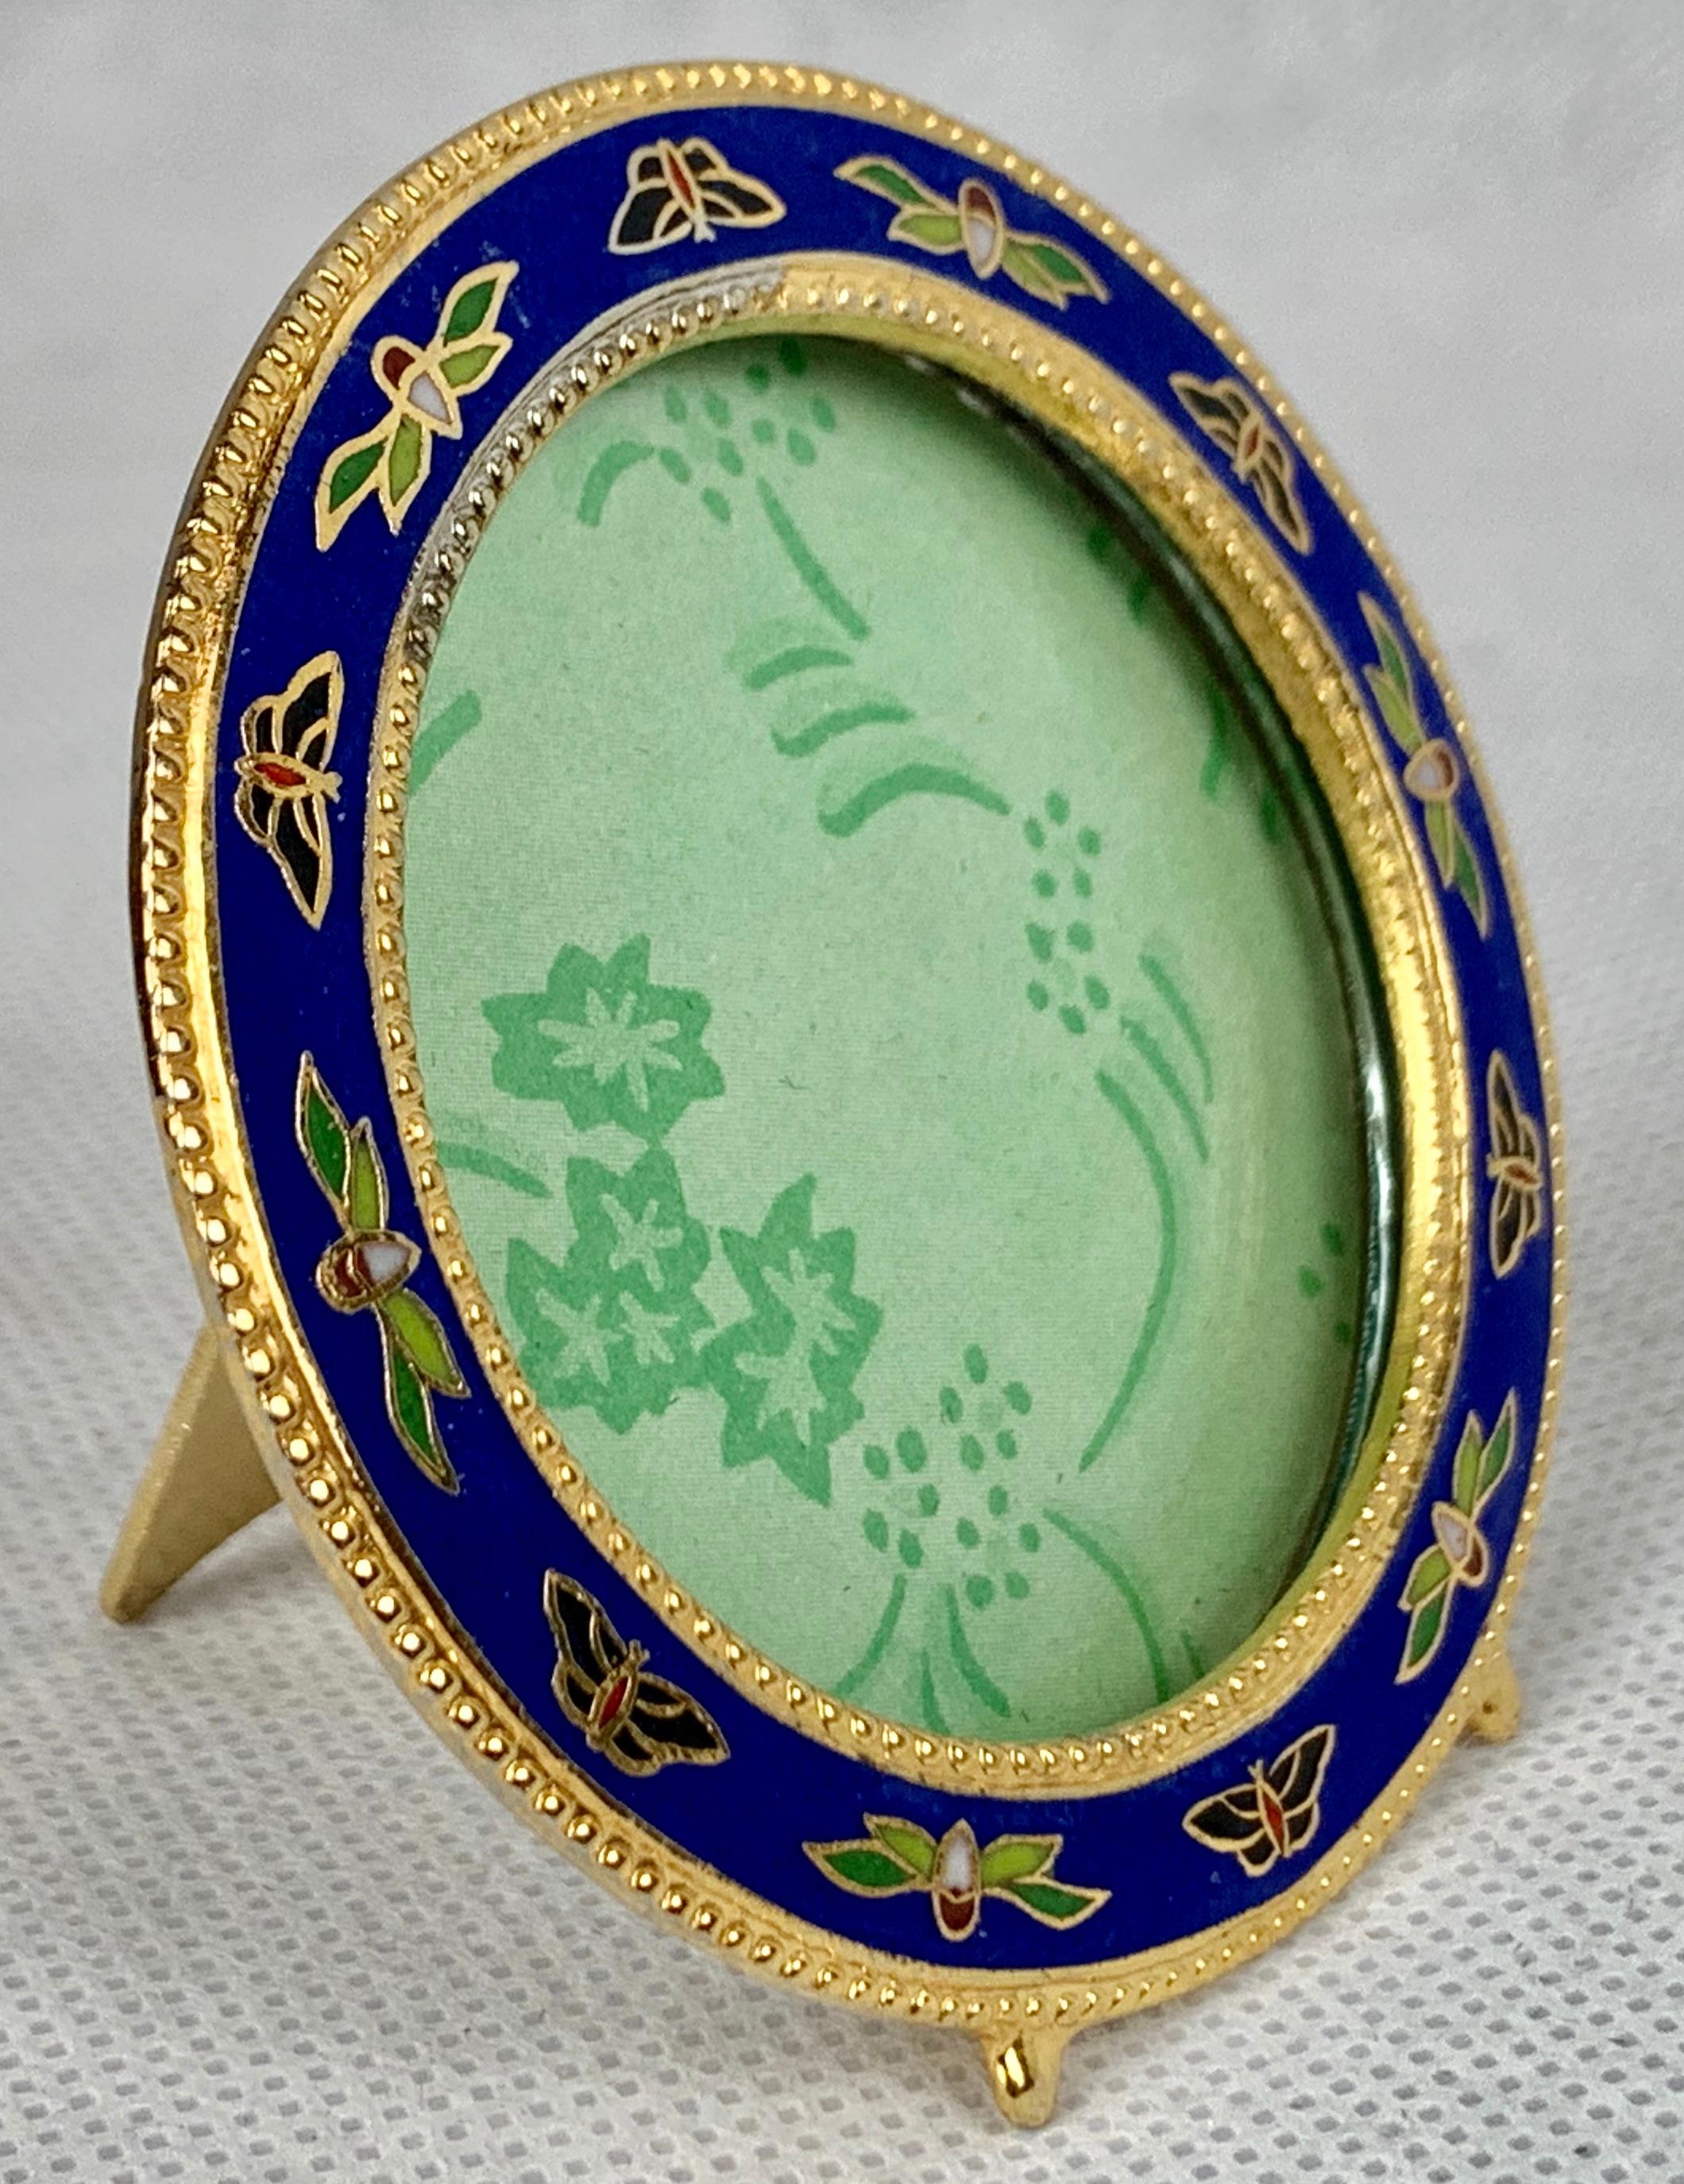  Round lapis lazuli blue champlevé enamel frame. The double border of the frame and the small ball feet are gilt.
Purchased in Paris.
The frame remains in never used condition.
   